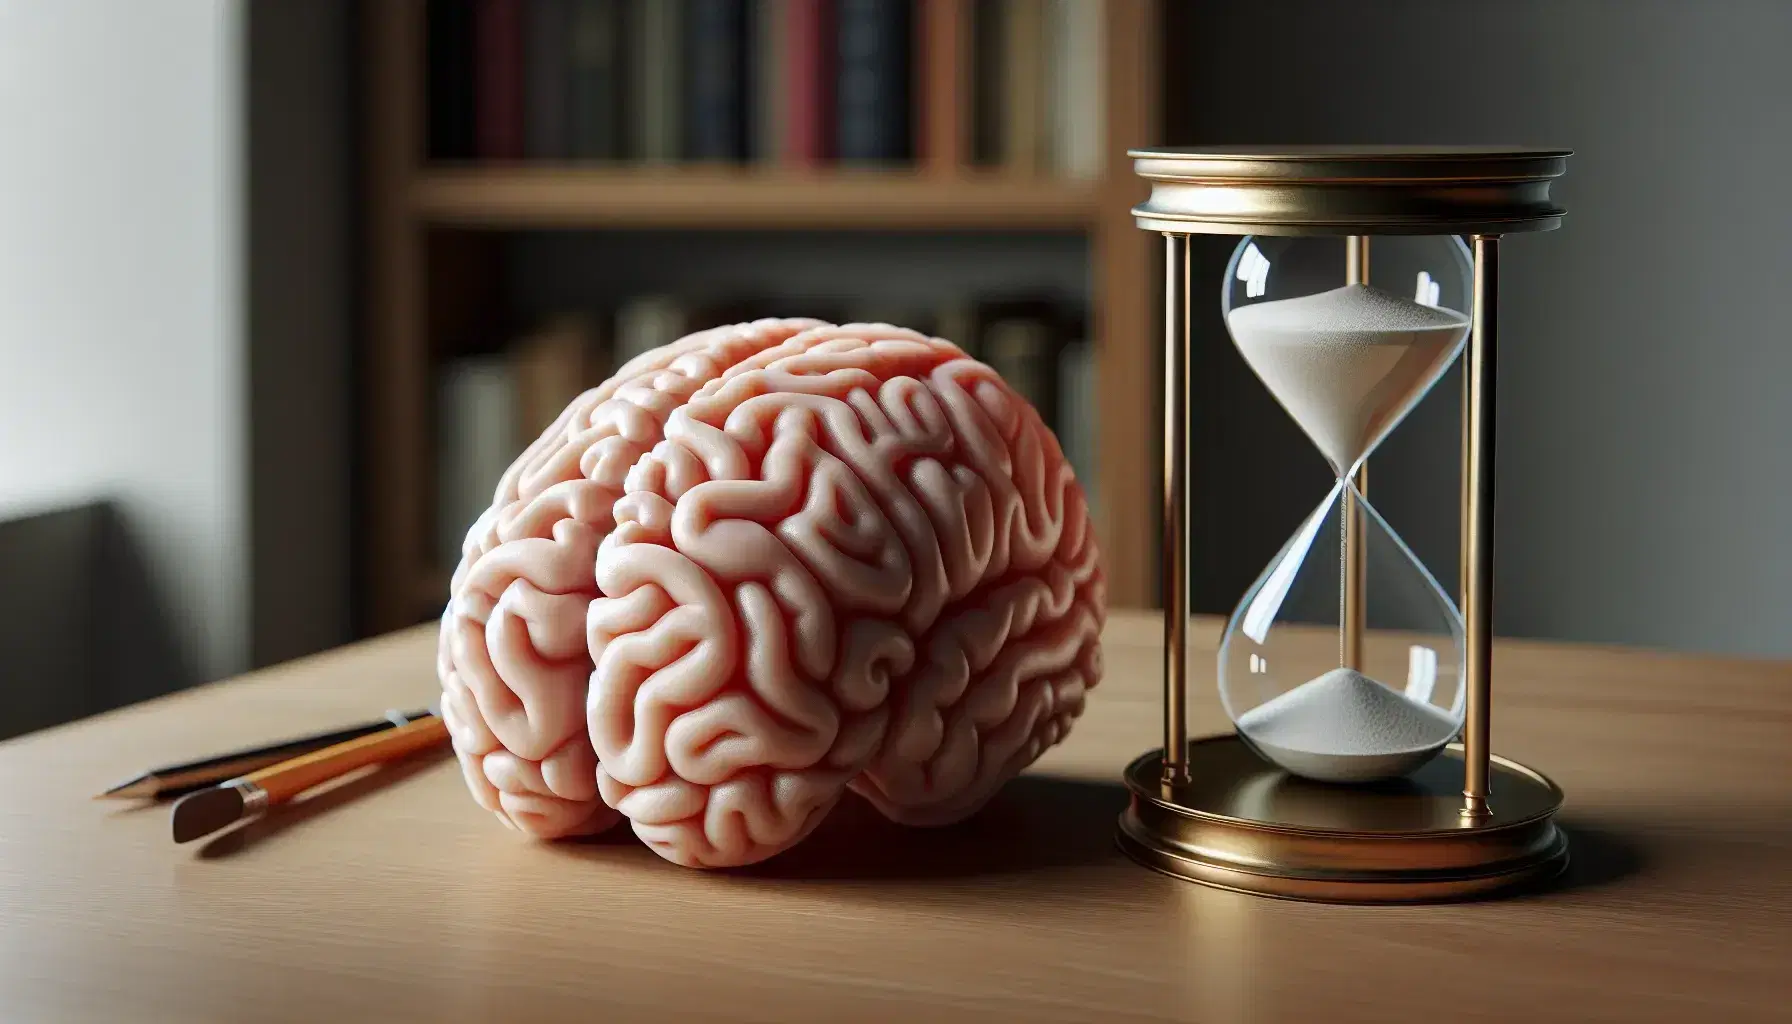 Anatomical model of human brain on wooden desk next to hourglass with white sand and blurred bookcase background.